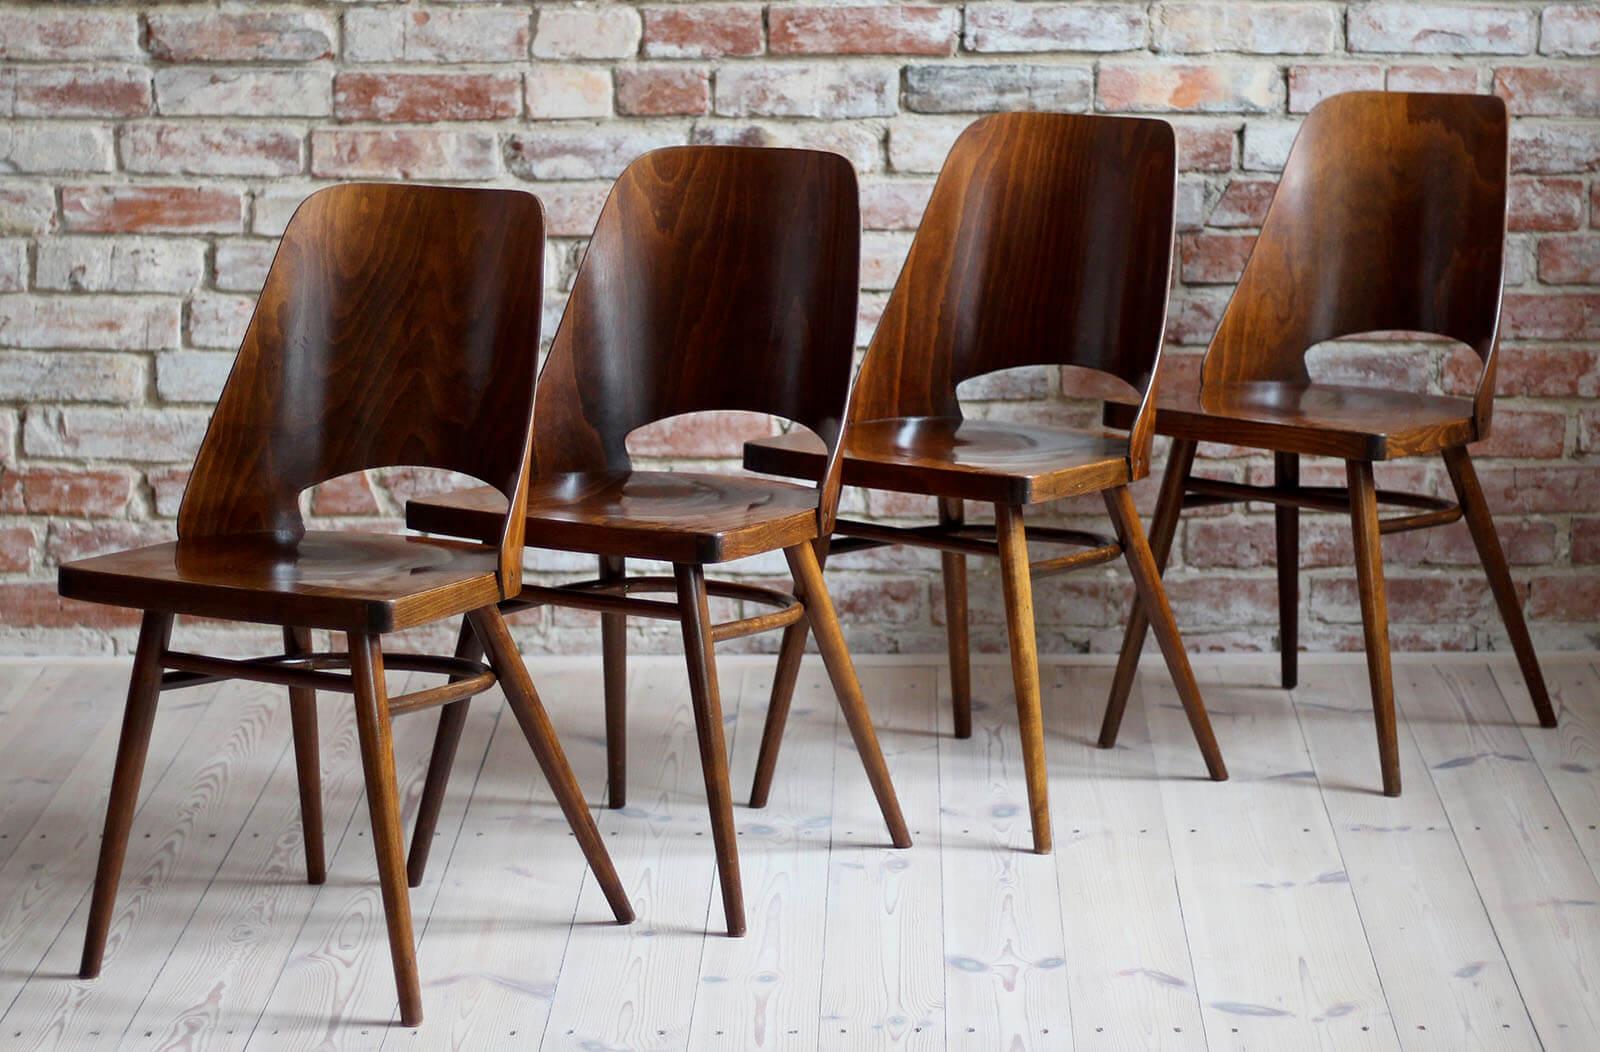 Set of 4 chairs designed by Radomir Hofman for TON, Model 514. The chairs are in very good original condition, have been cleaned and are ready to use. They are veneered with beechwood. Beautiful set for a coffee shop or a small restaurant! More